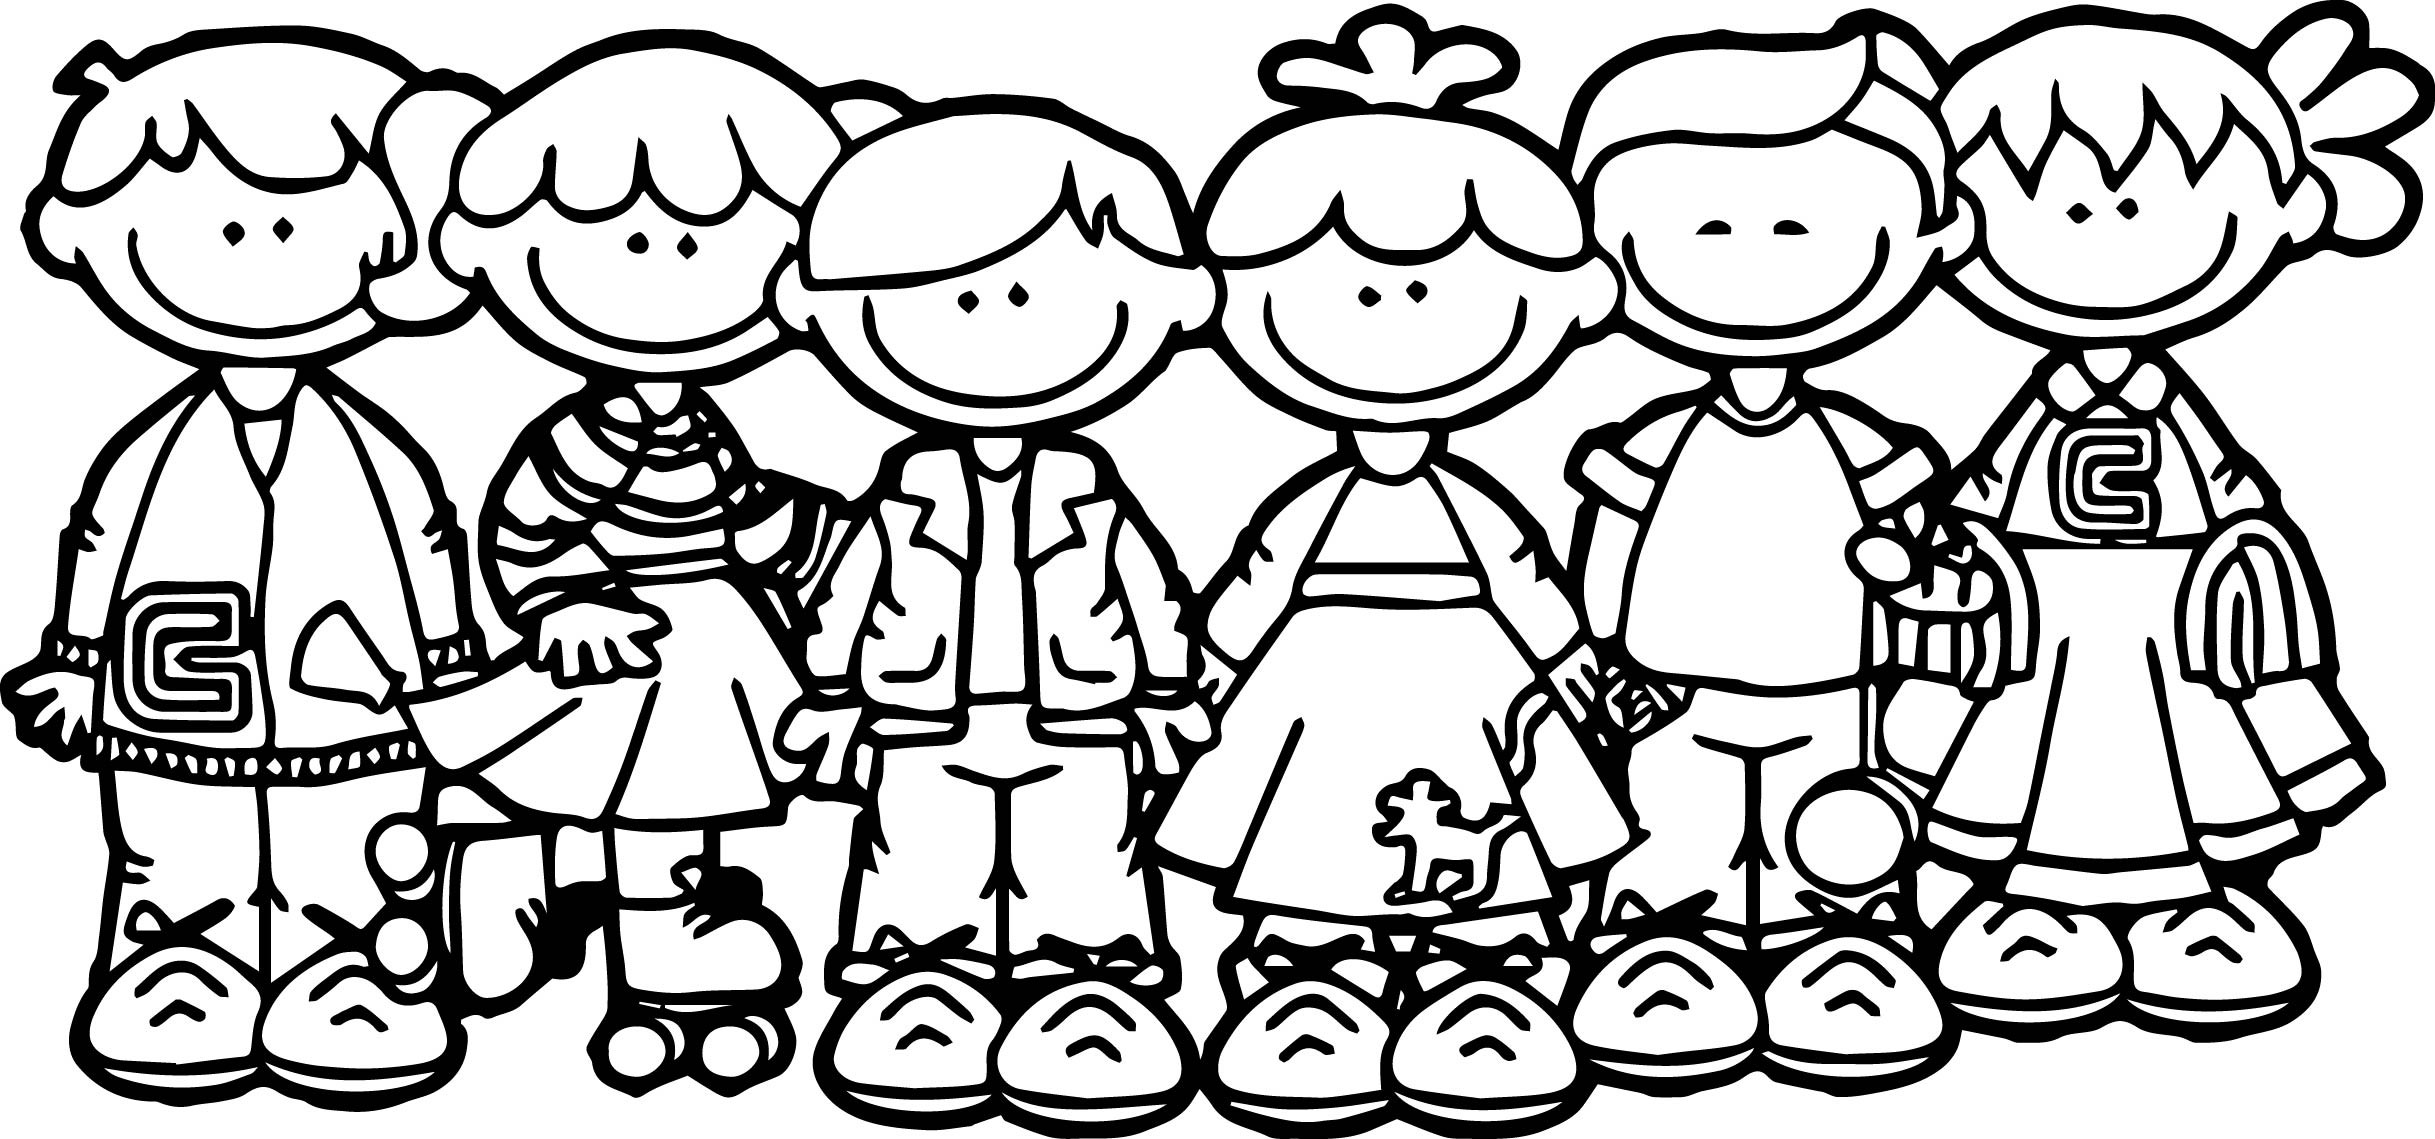 Kids At School Coloring Page Coloring Pages